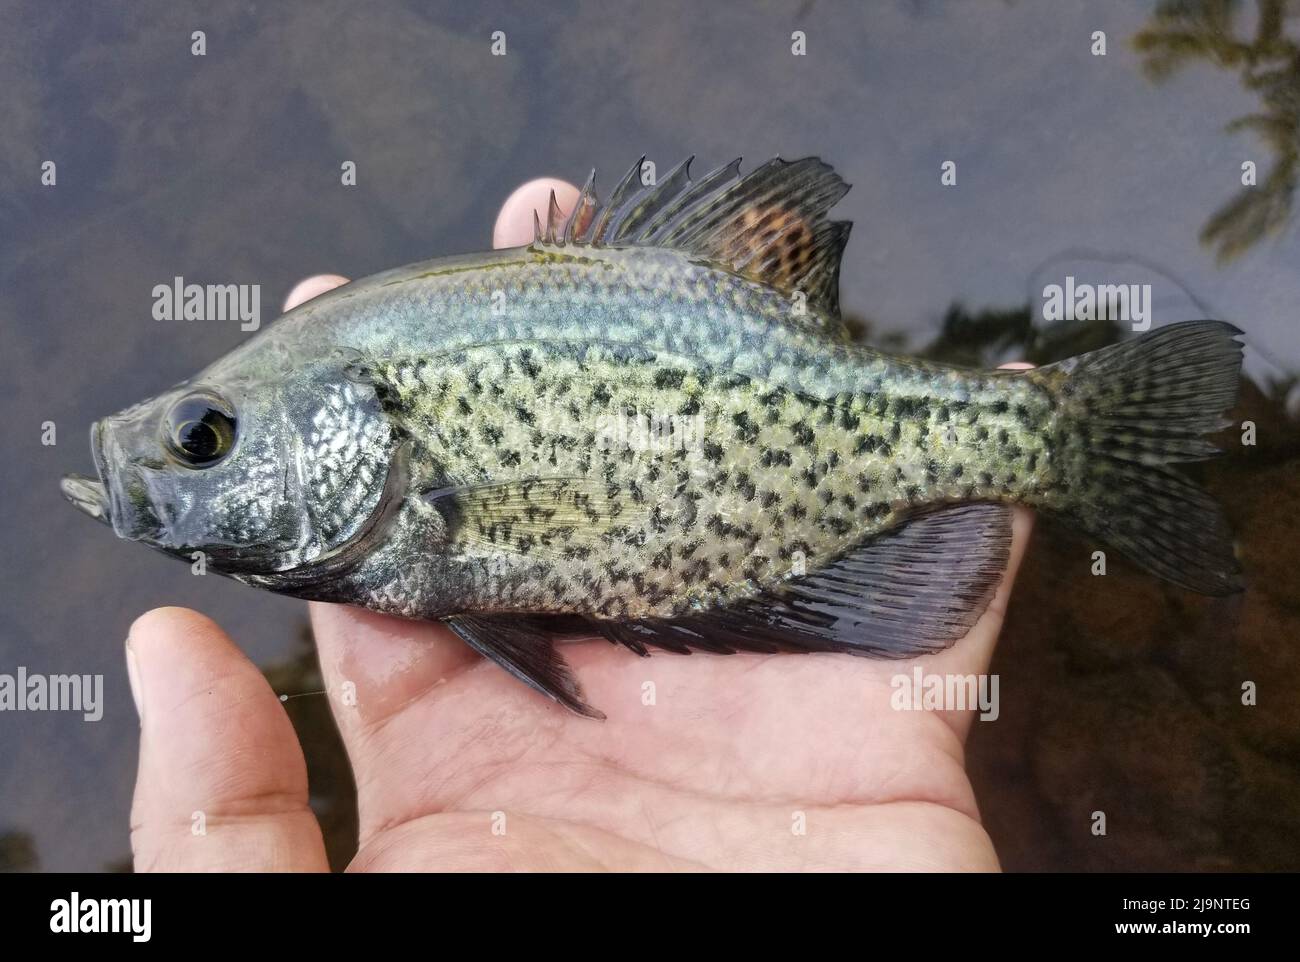 Holding a live crappie before being released in the lake Stock Photo